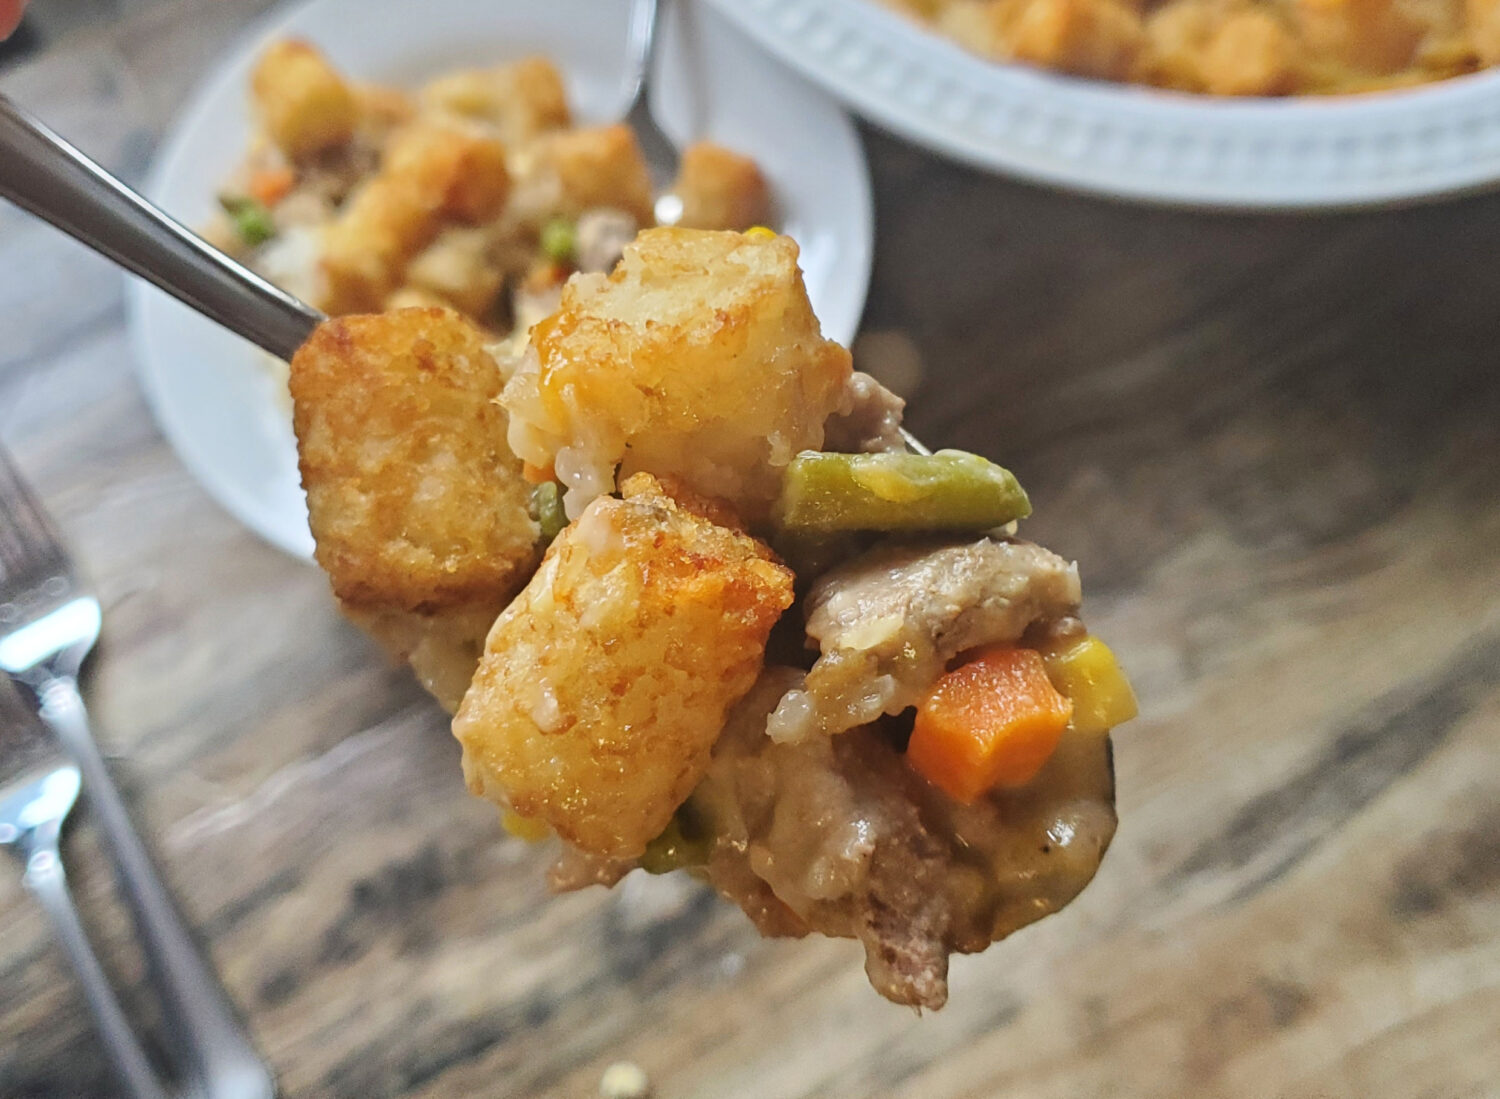 Cheesy Tater Tot Dinner Pie: Ground beef or turkey and veggies baked in a cheese bechamel sauce and topped with crispy Tater Tots!